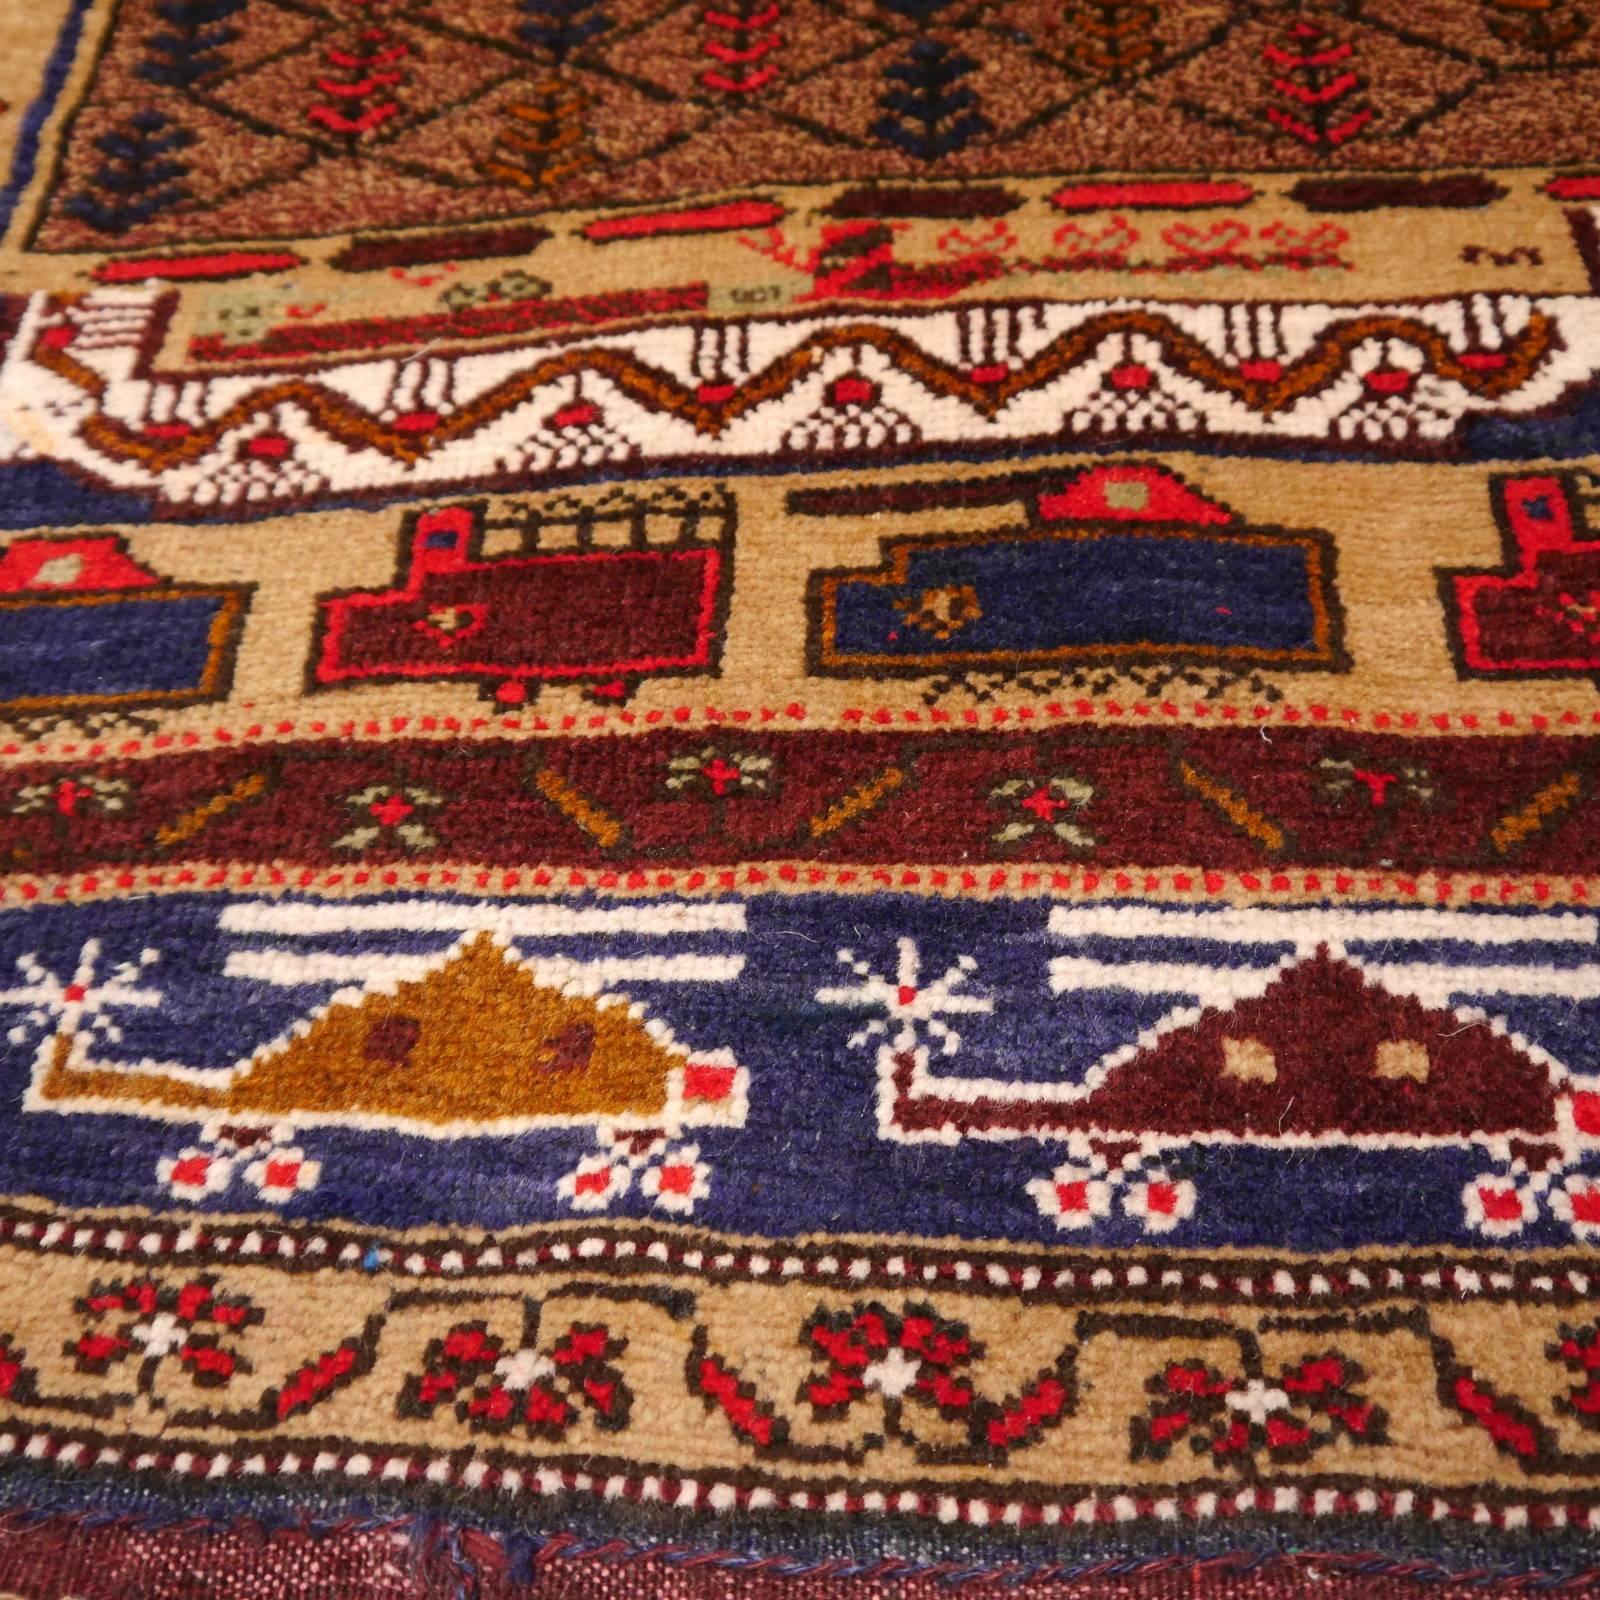 Wool Vintage Afghan War Rug with Tanks and Helicopters